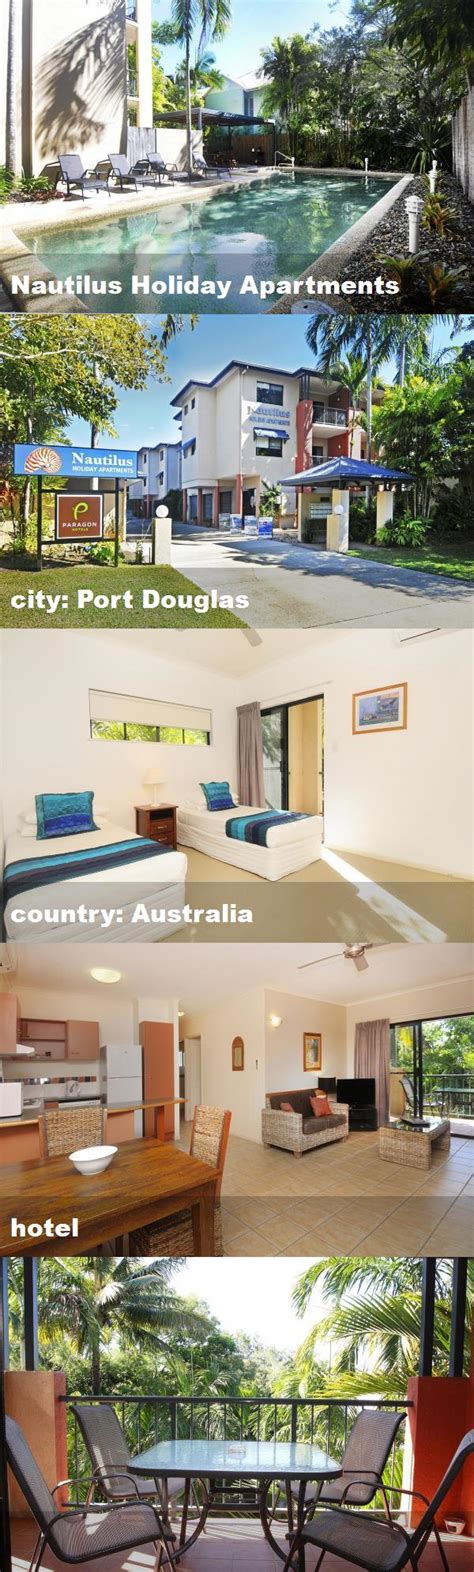 nautilus holiday apartments port douglas Coconut Grove is a 5-star resort offering luxurious self-contained apartments in Port Douglas